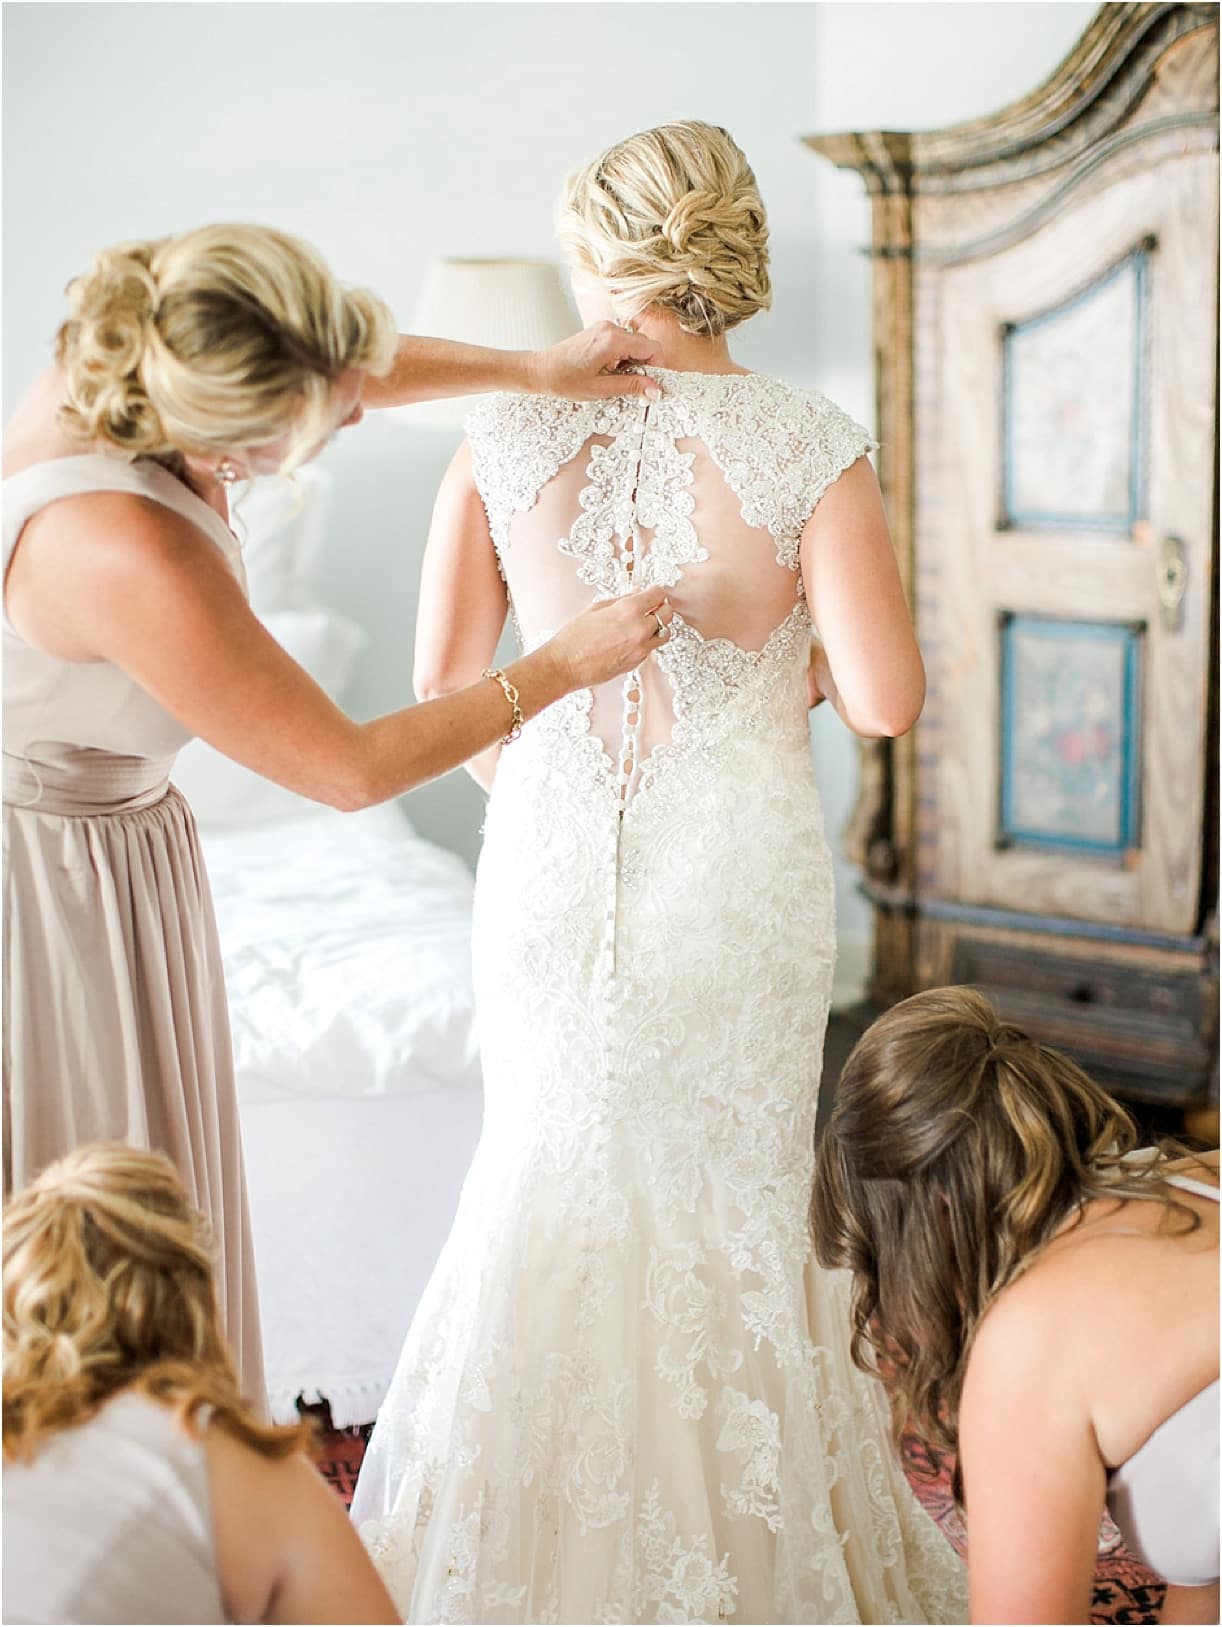 Historic Virginia Plantation Wedding as seen on Hill City Bride Blog by Rebekah Emily Photography - gown, dress, getting ready